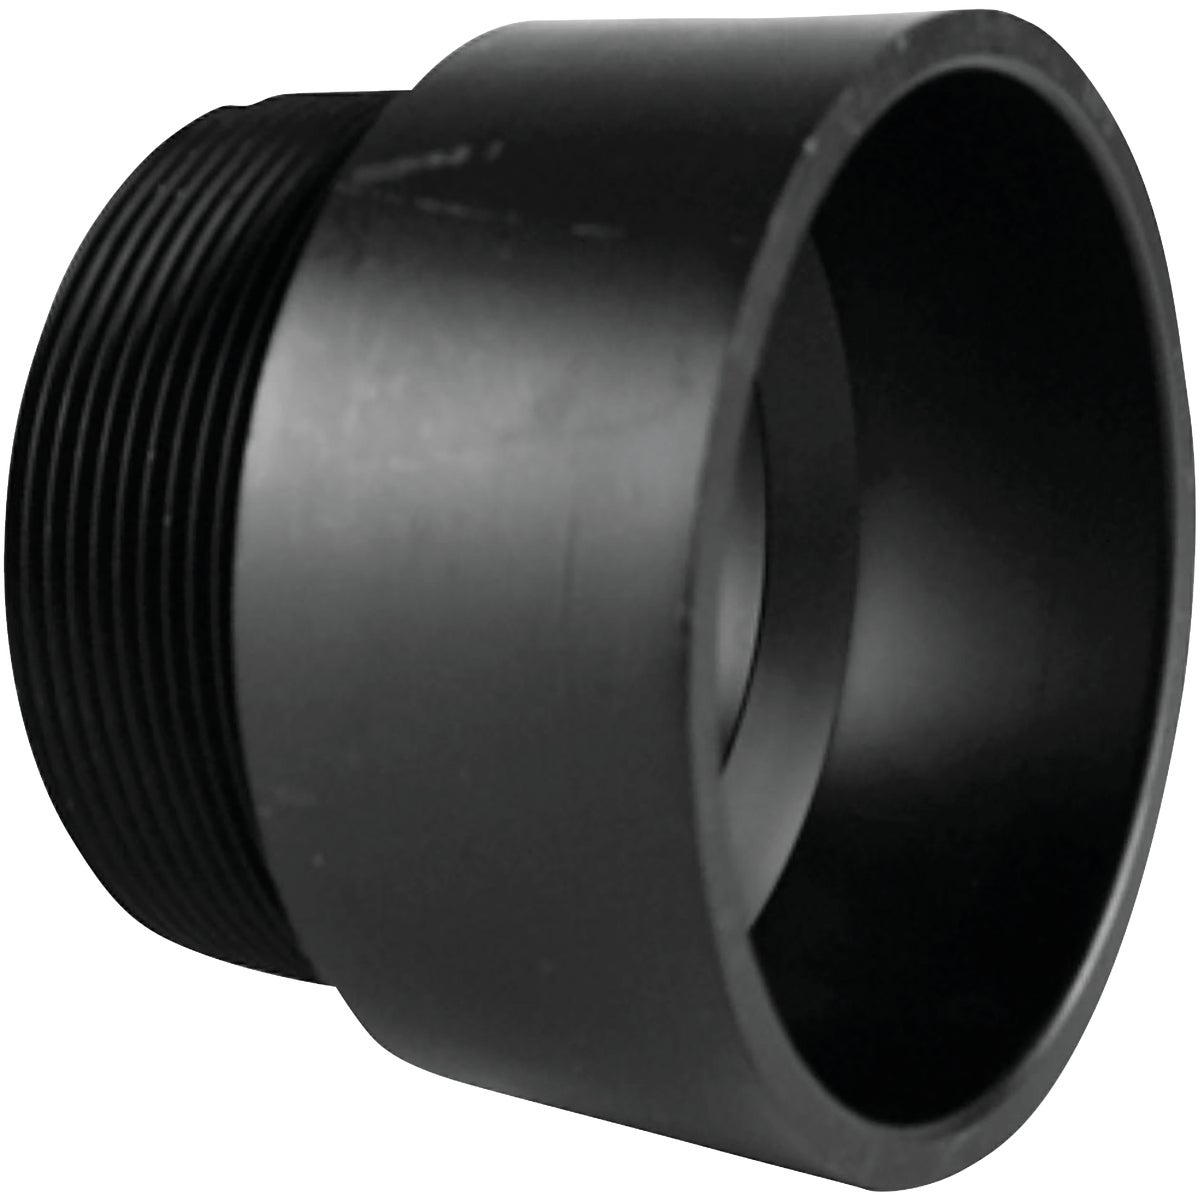 Charlotte Pipe 1-1/2 In. Hub x MPT Male ABS Adapter